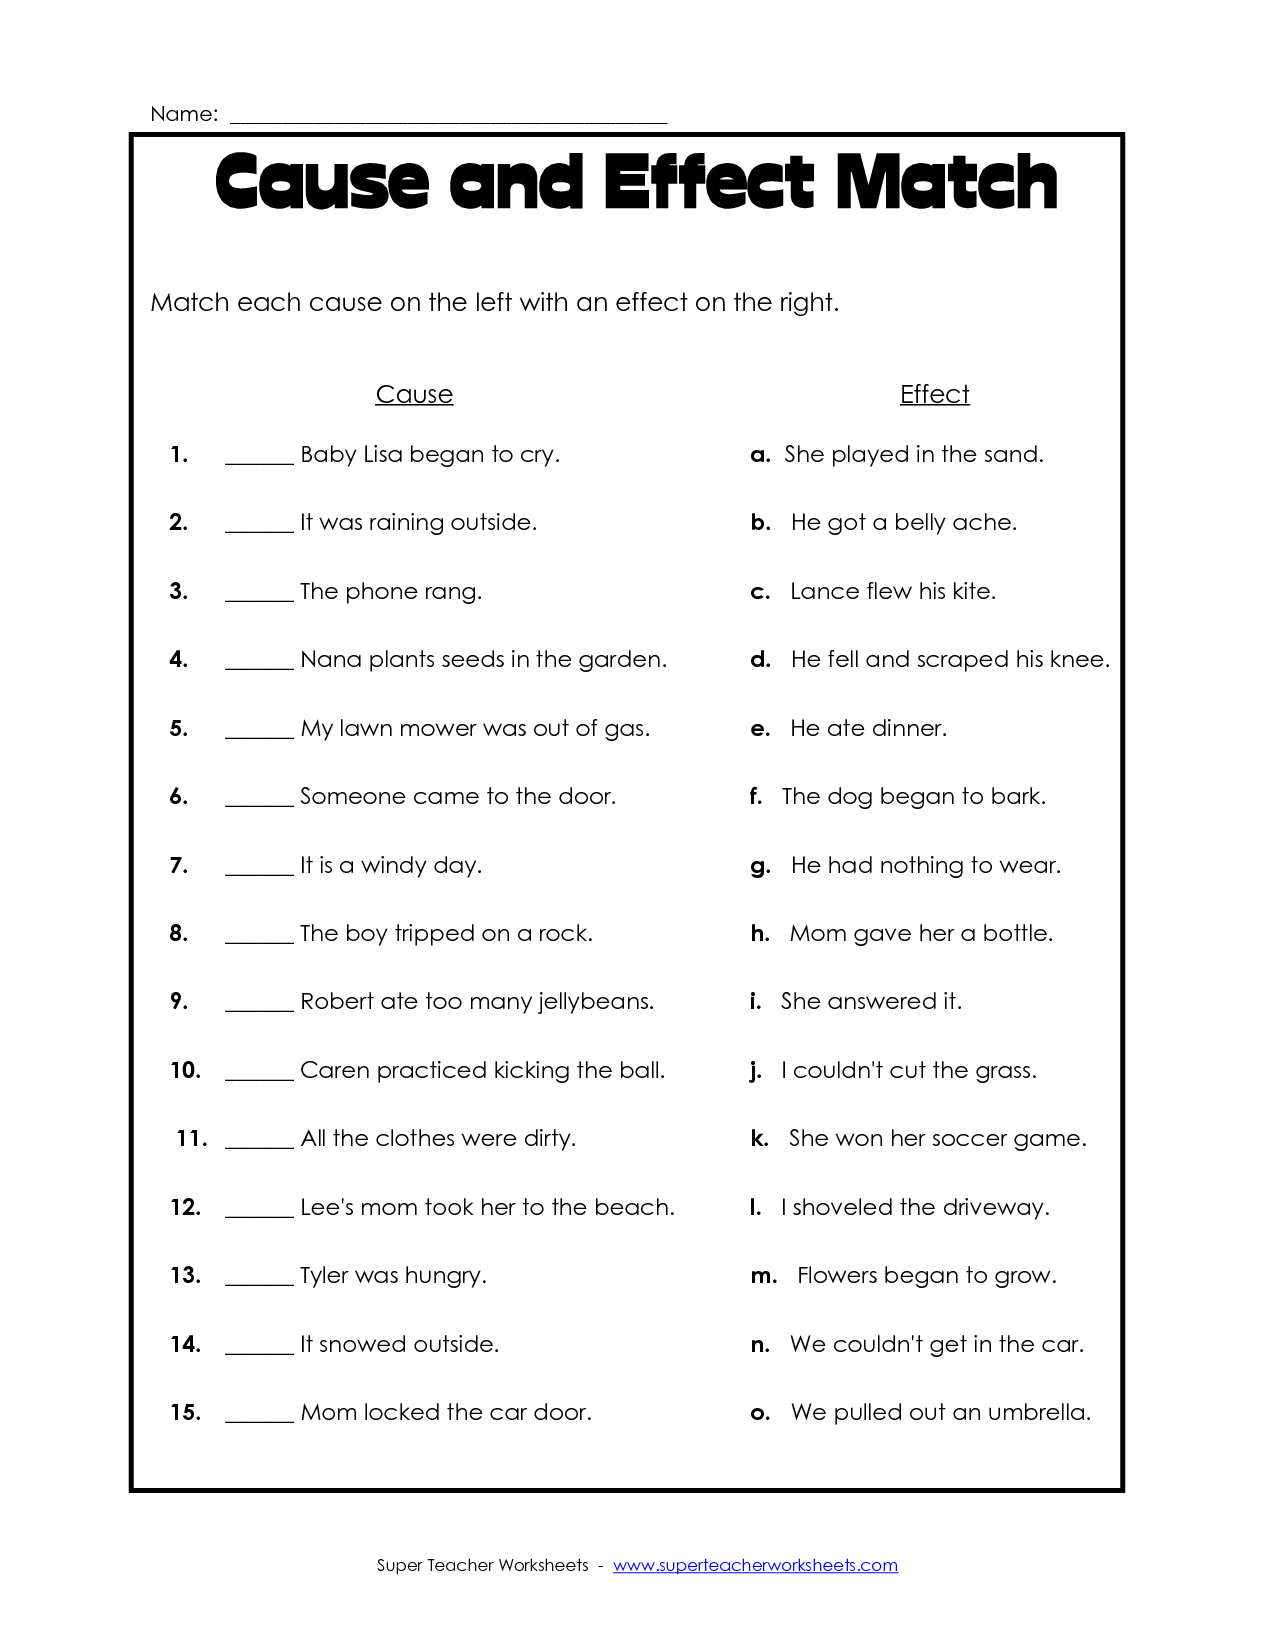 Cause and Effect Worksheets 2nd Grade